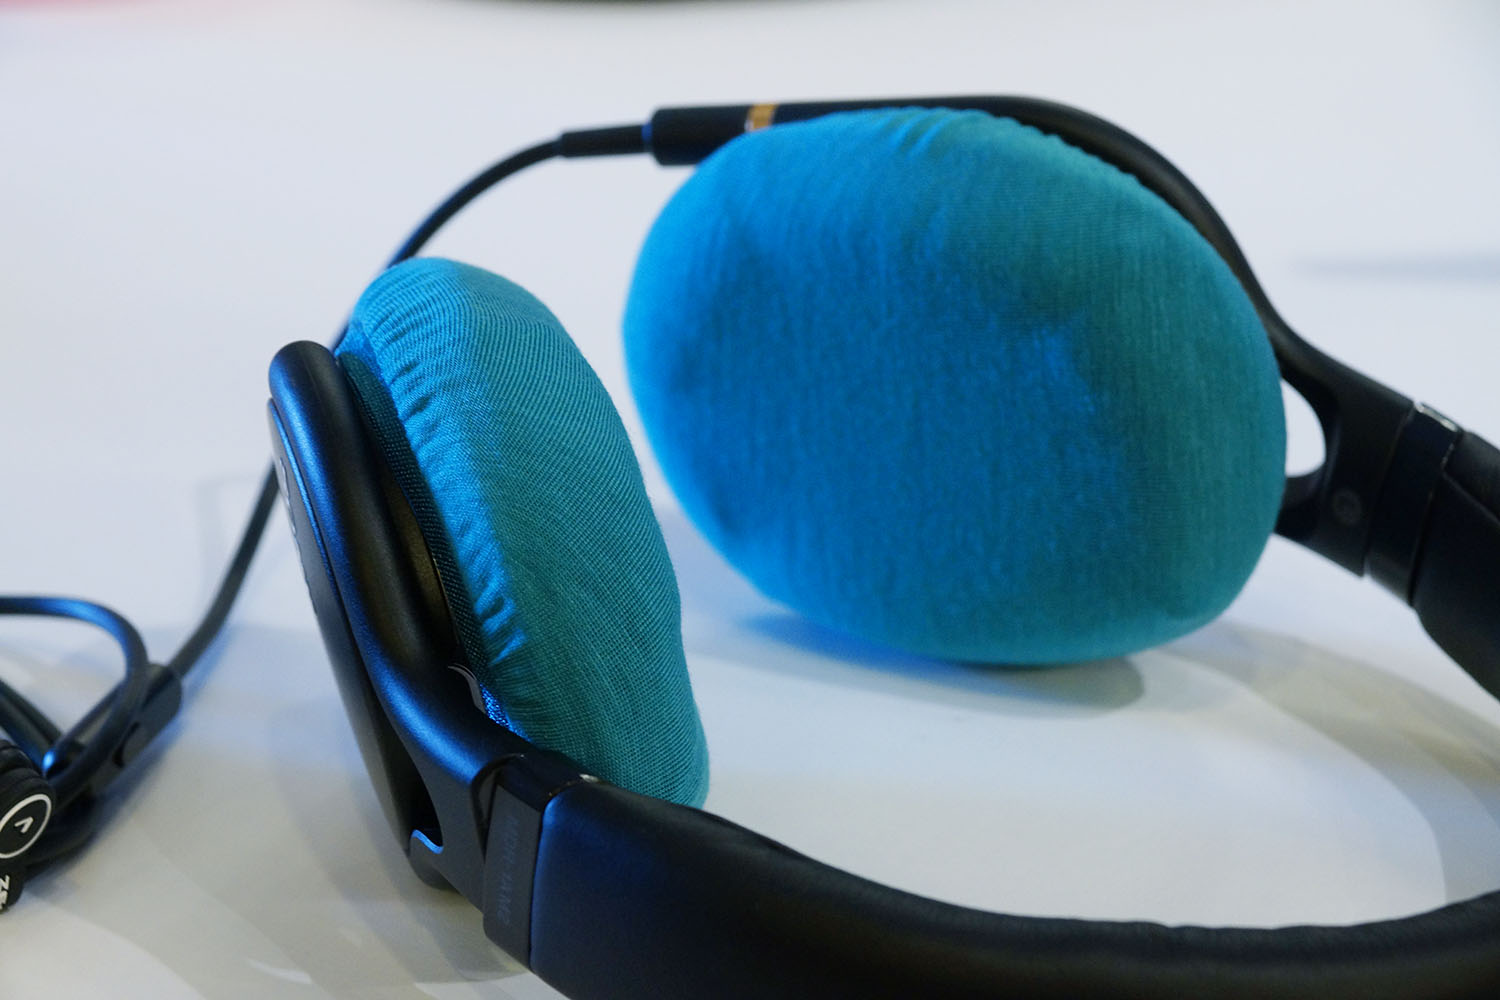 SONY MDR-1AM2 earpad repair and protection: Super Stretch